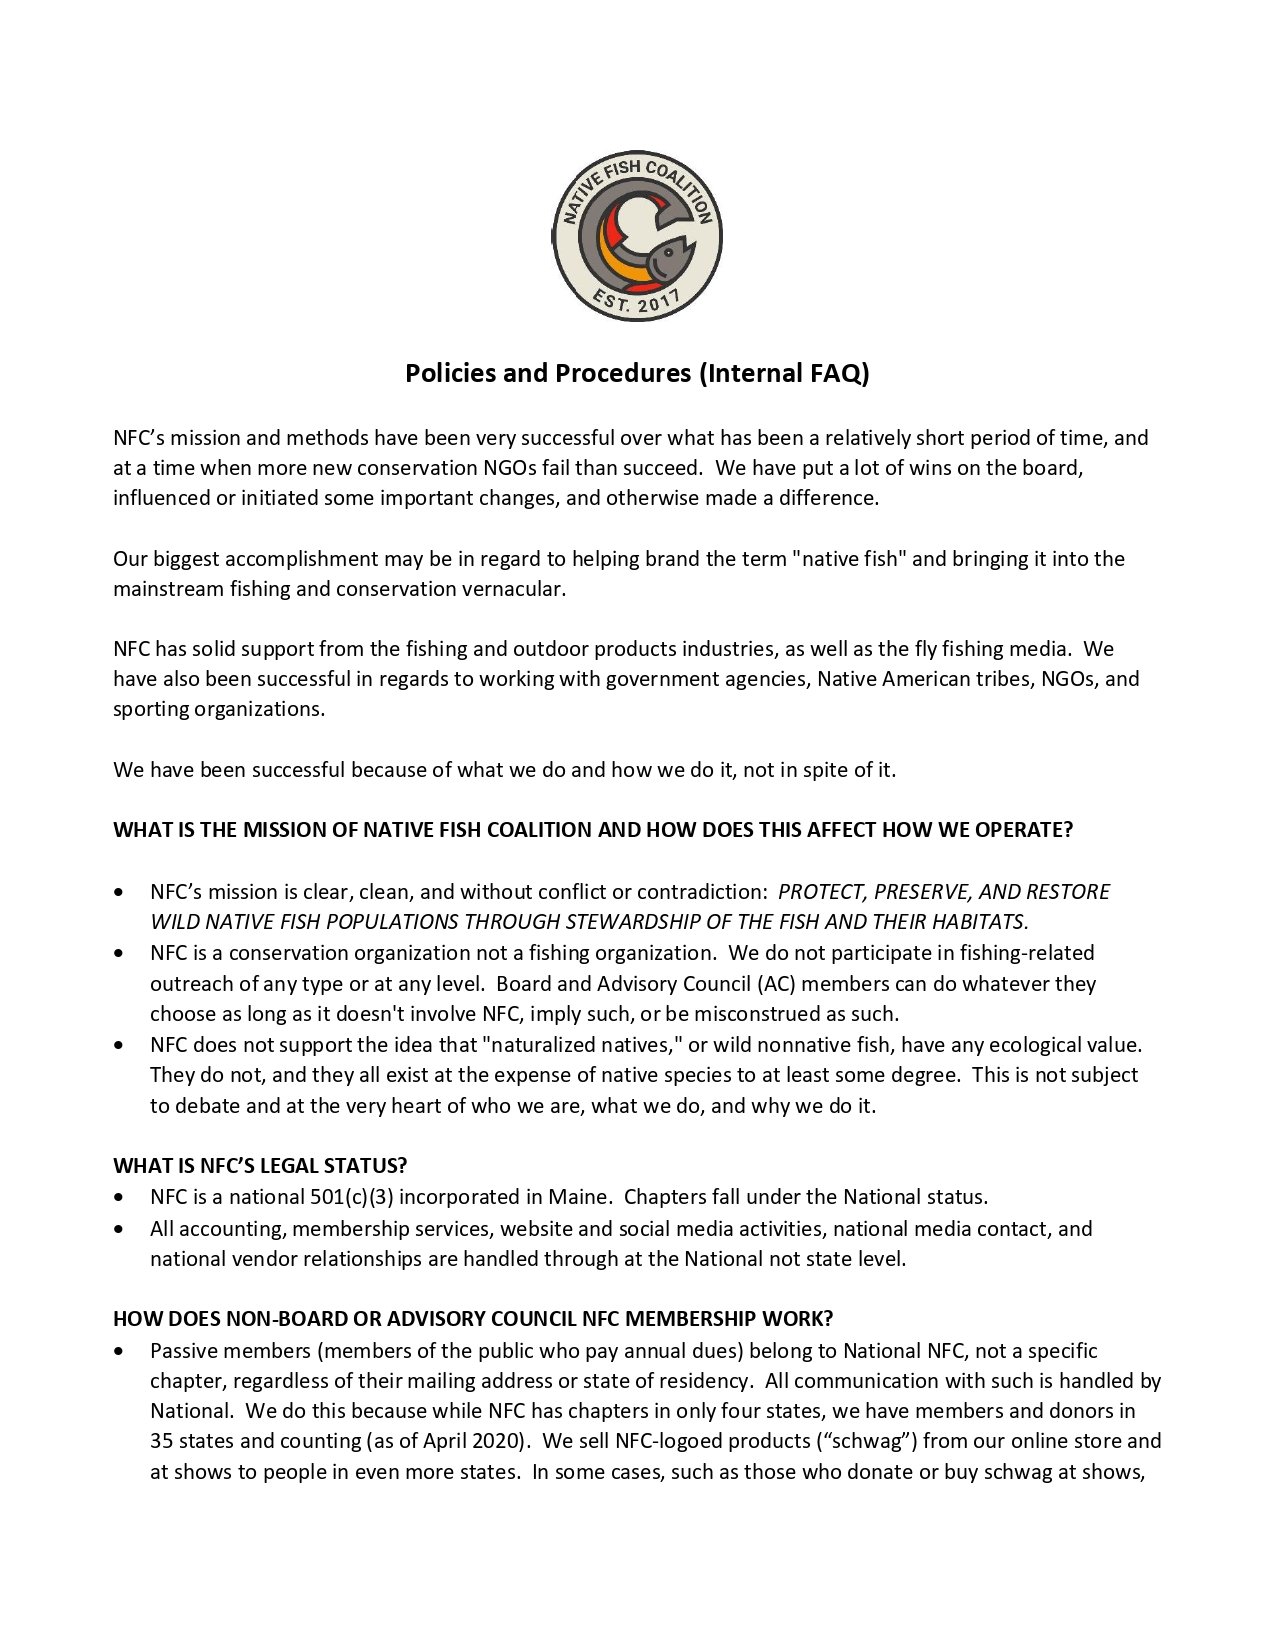 Policies and Procedures - NFC Internal FAQs_page-0001.jpg